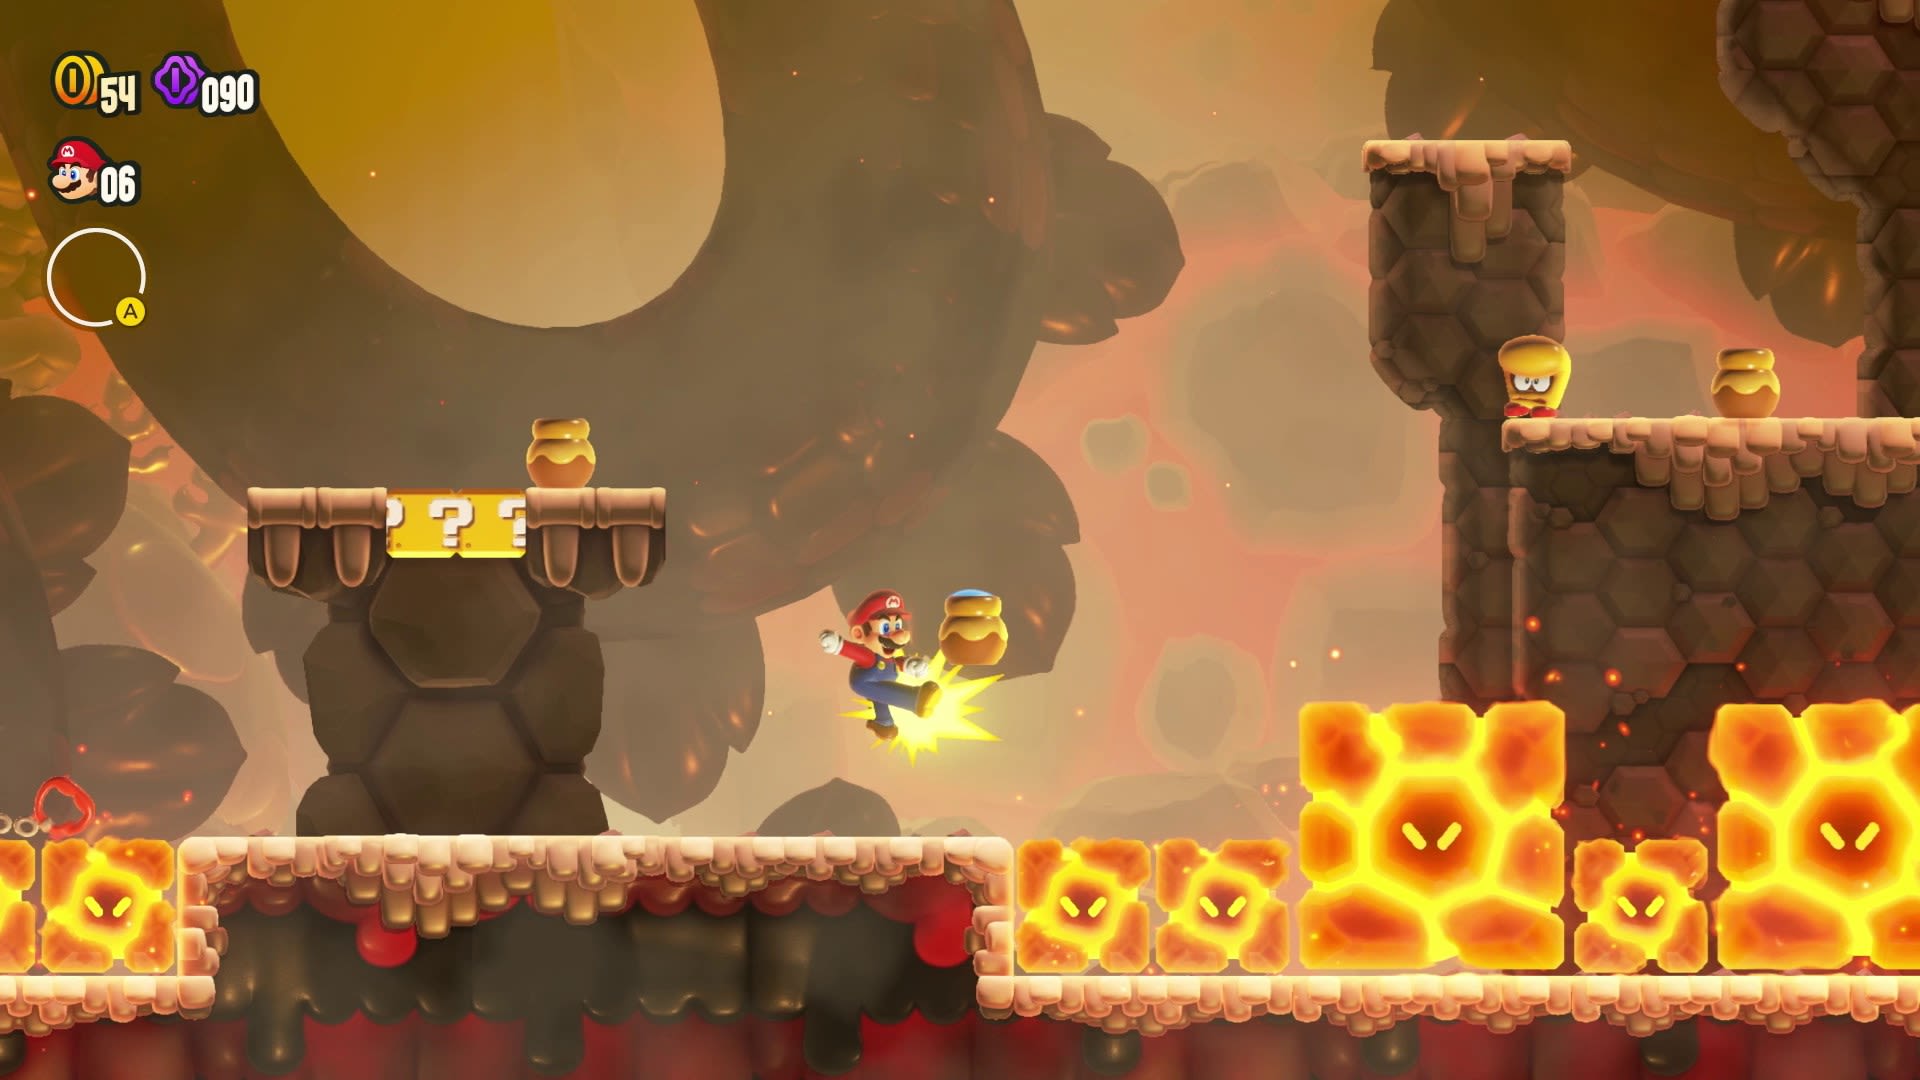 Ugami's Super Mario Wonder Review: is it worth it?